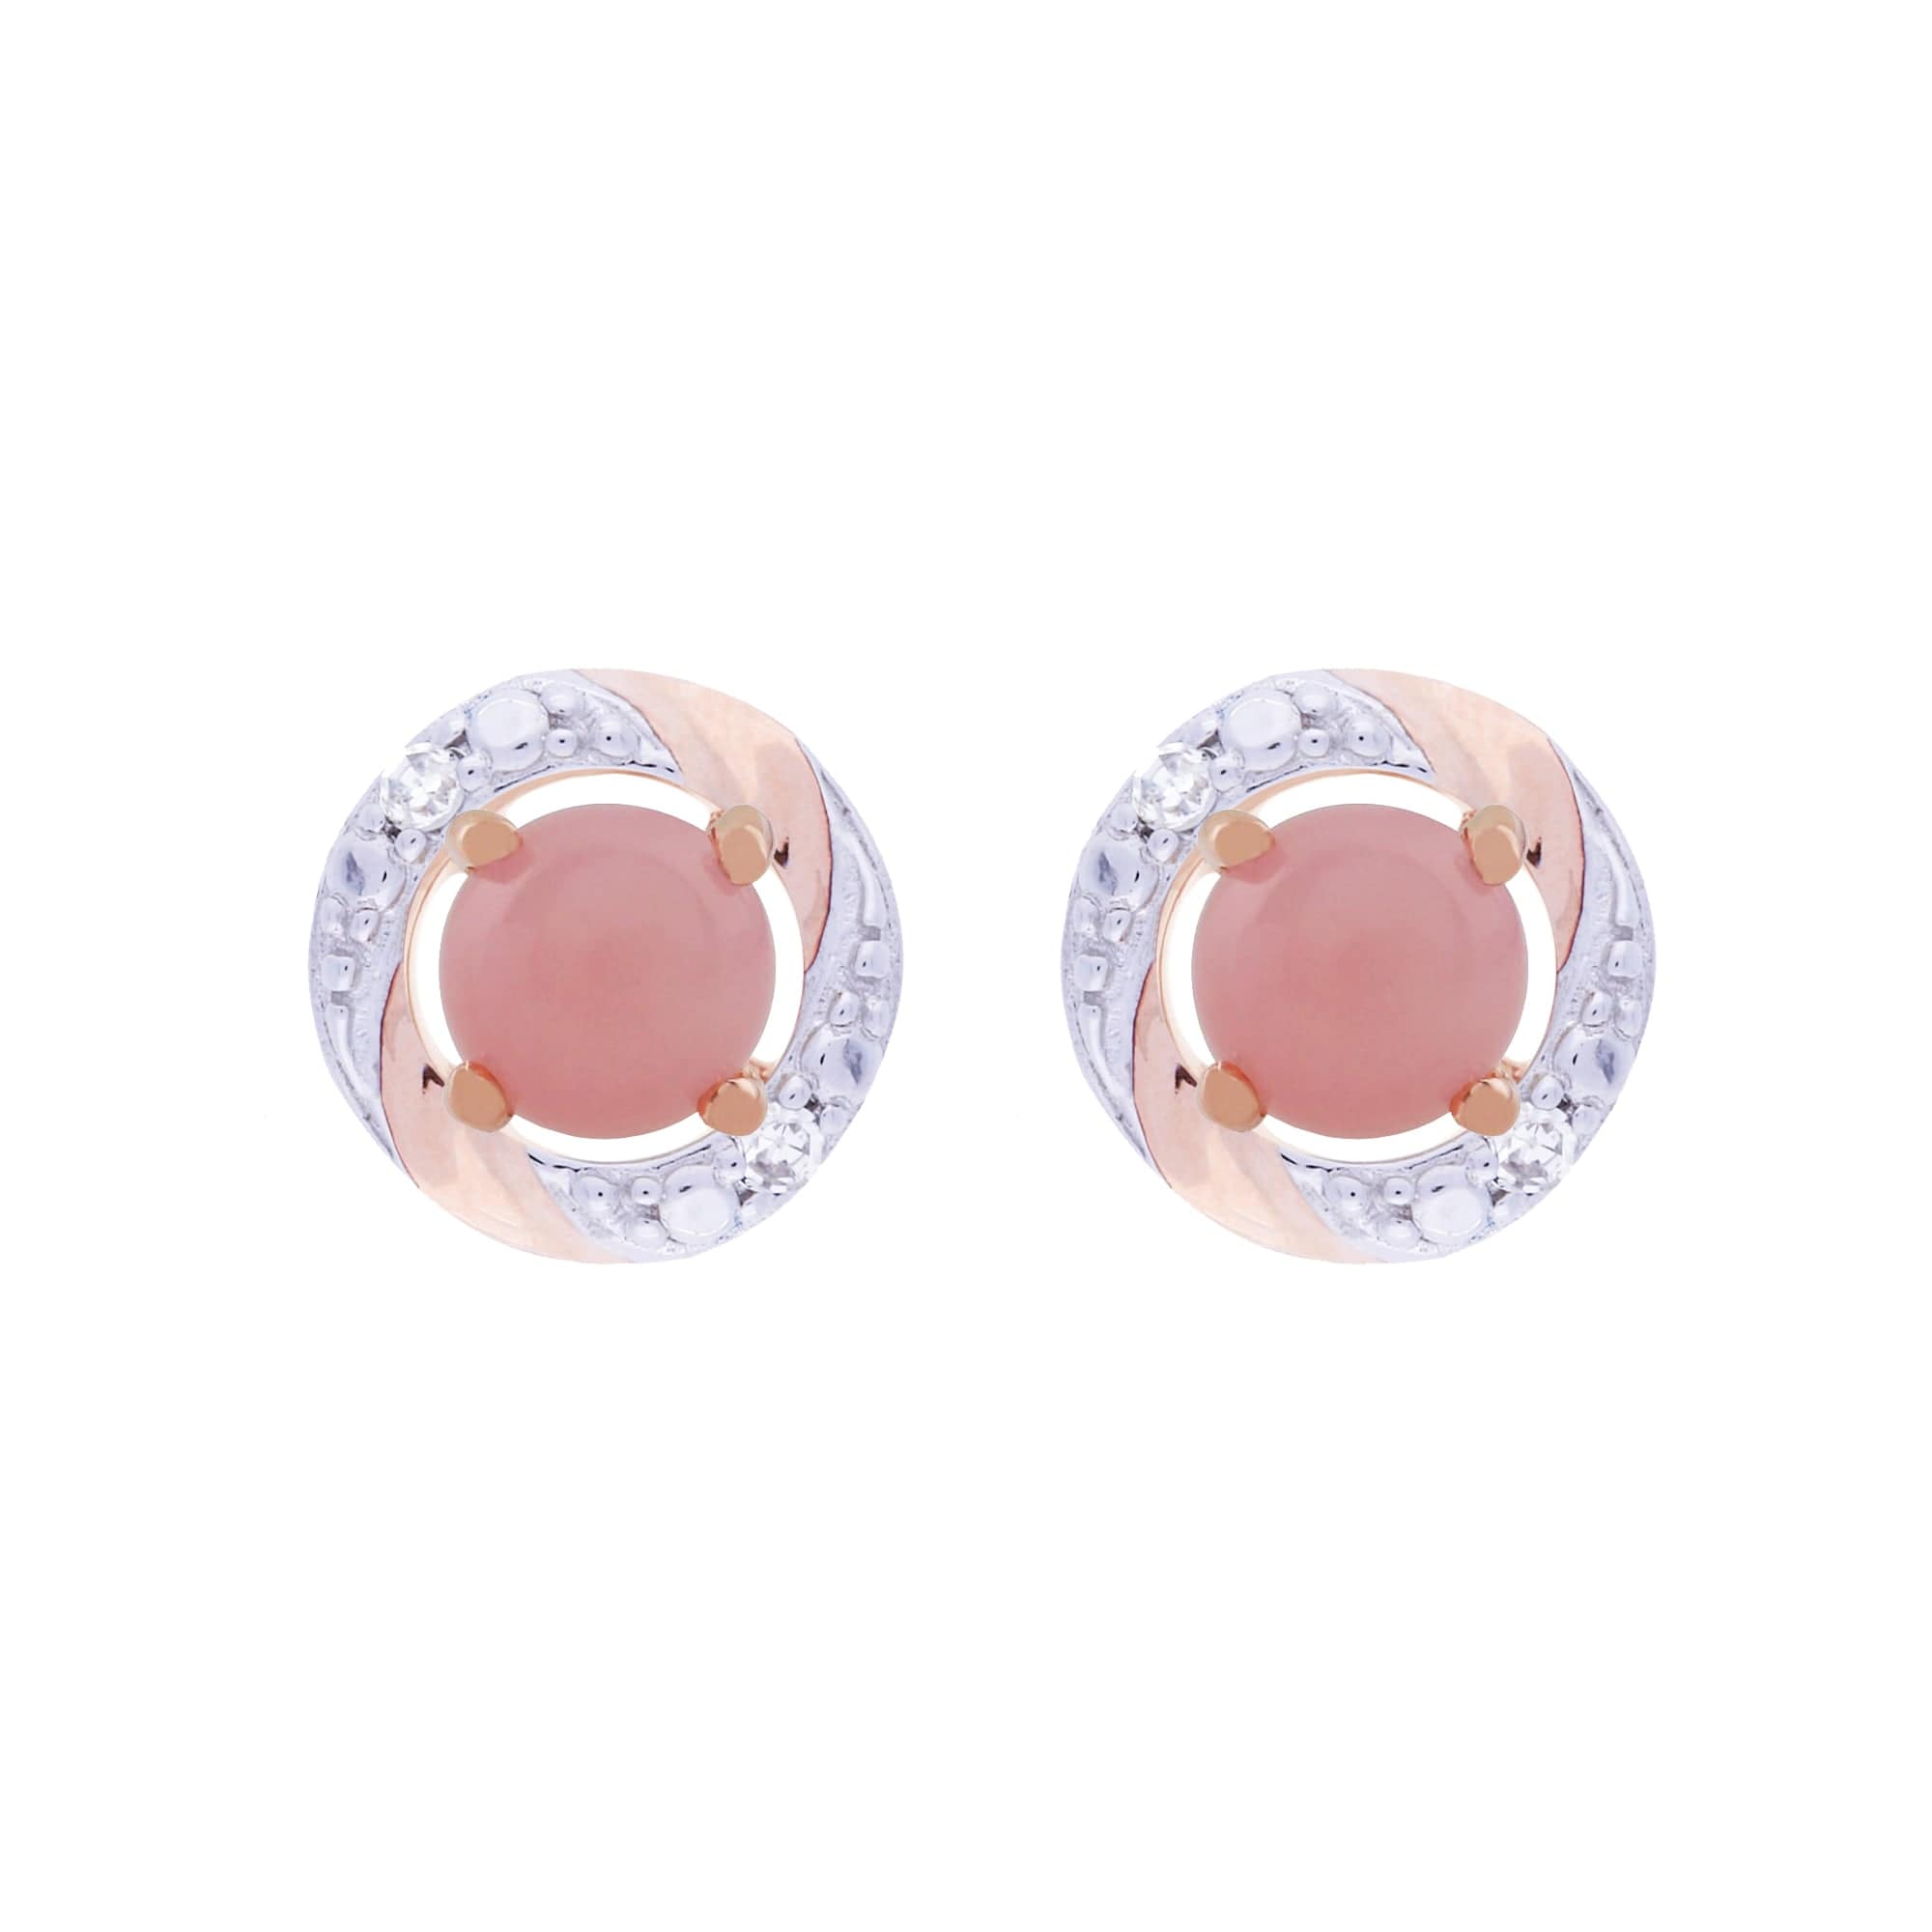 183E4316039-191E0378019 Classic Round Pink Opal Stud Earrings with Detachable Diamond Round Earrings Jacket Set in 9ct Rose Gold 1